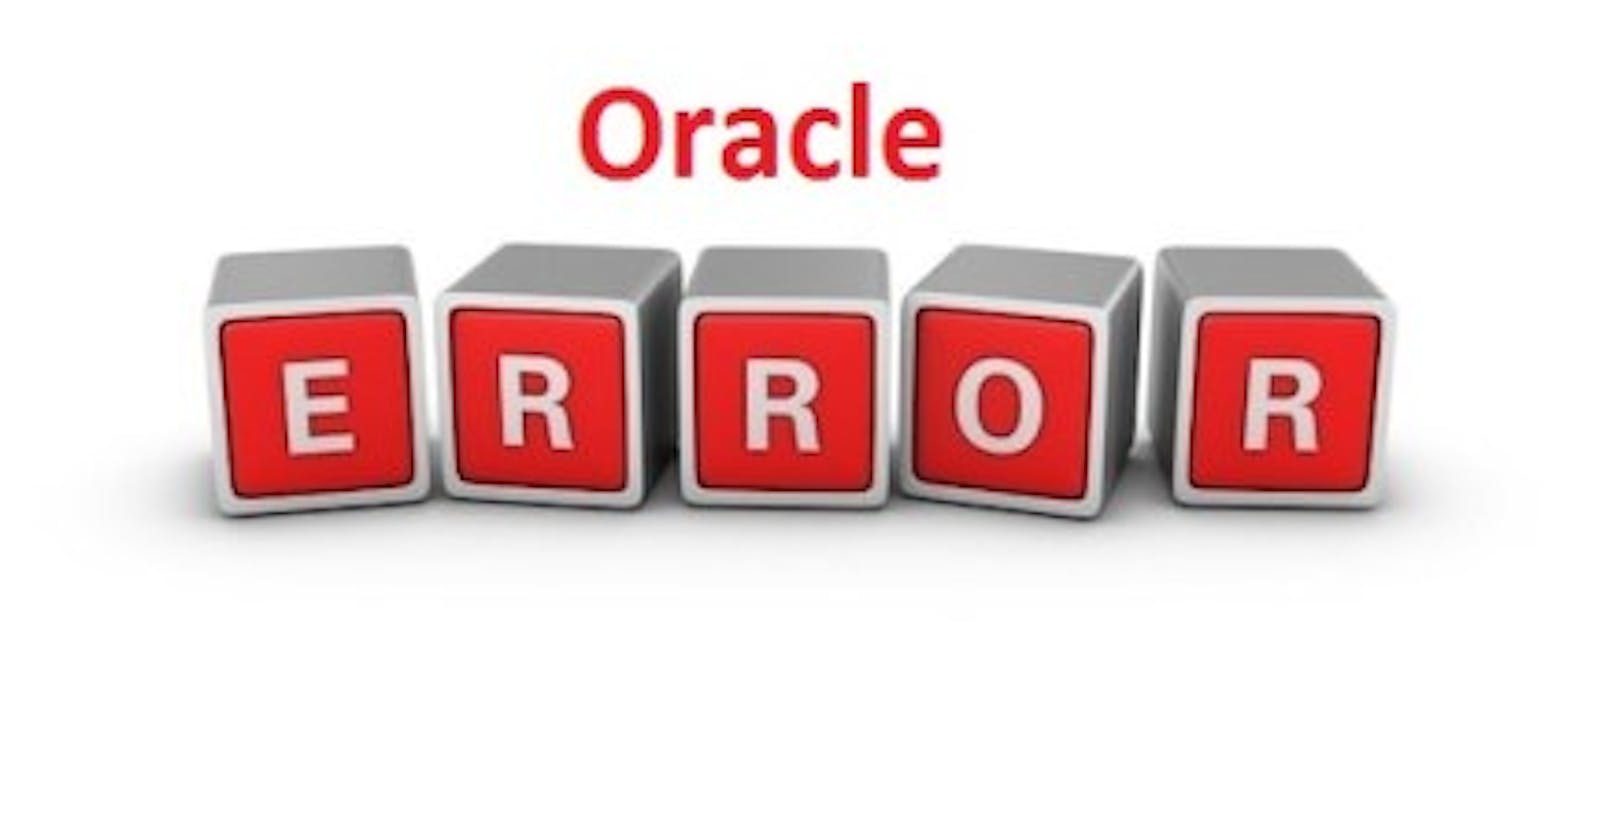 The Second Encounter

.......
How to solve:-> ORA-01034: ORACLE not available